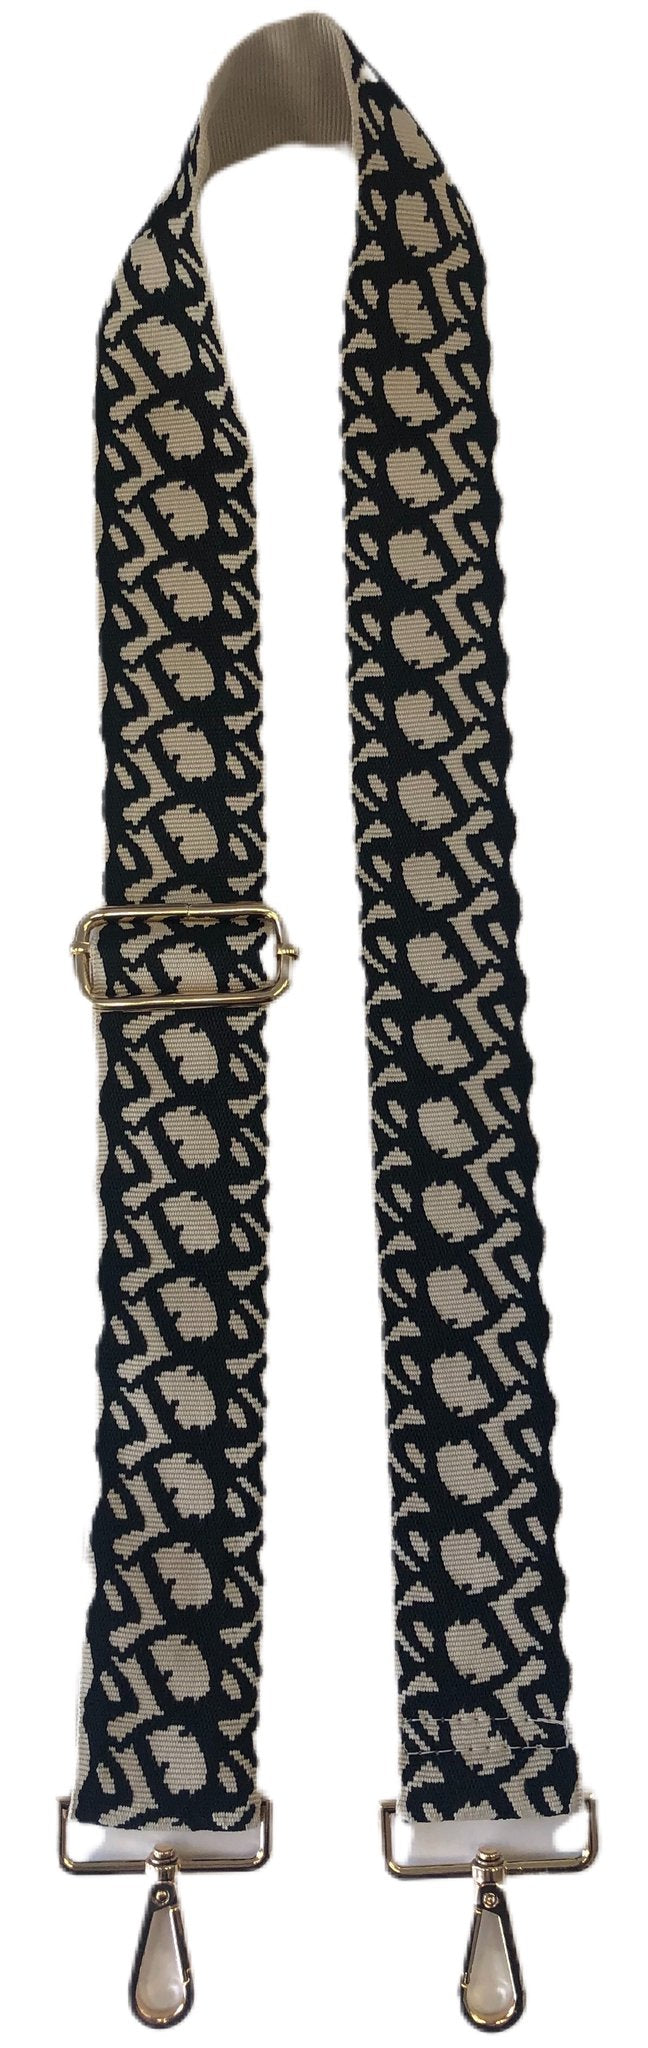 AHDORNED Cream Ground 2" Strap - Cream/Black available at The Good Life Boutique